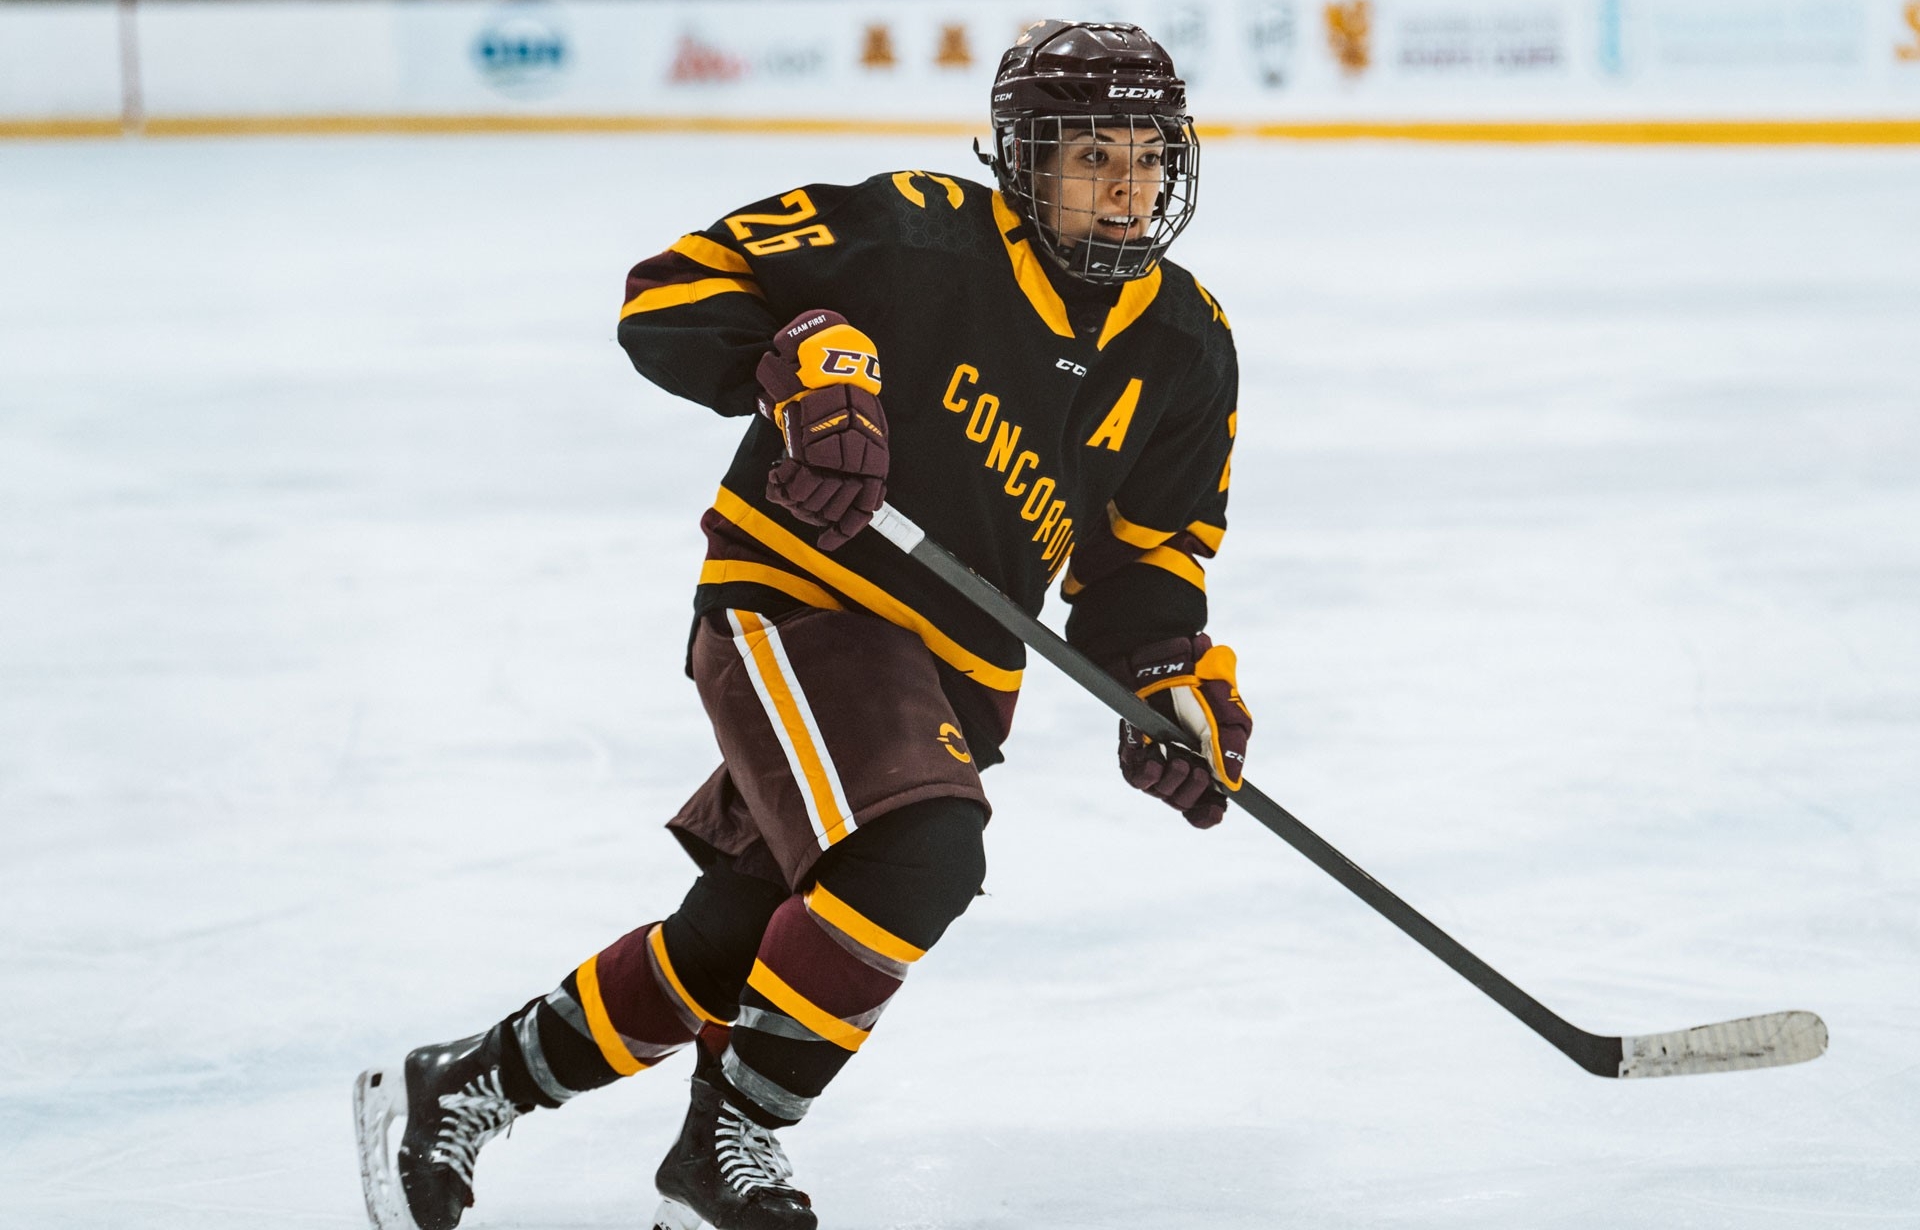 A hockey player for the Concordia Stingers skates along the ice